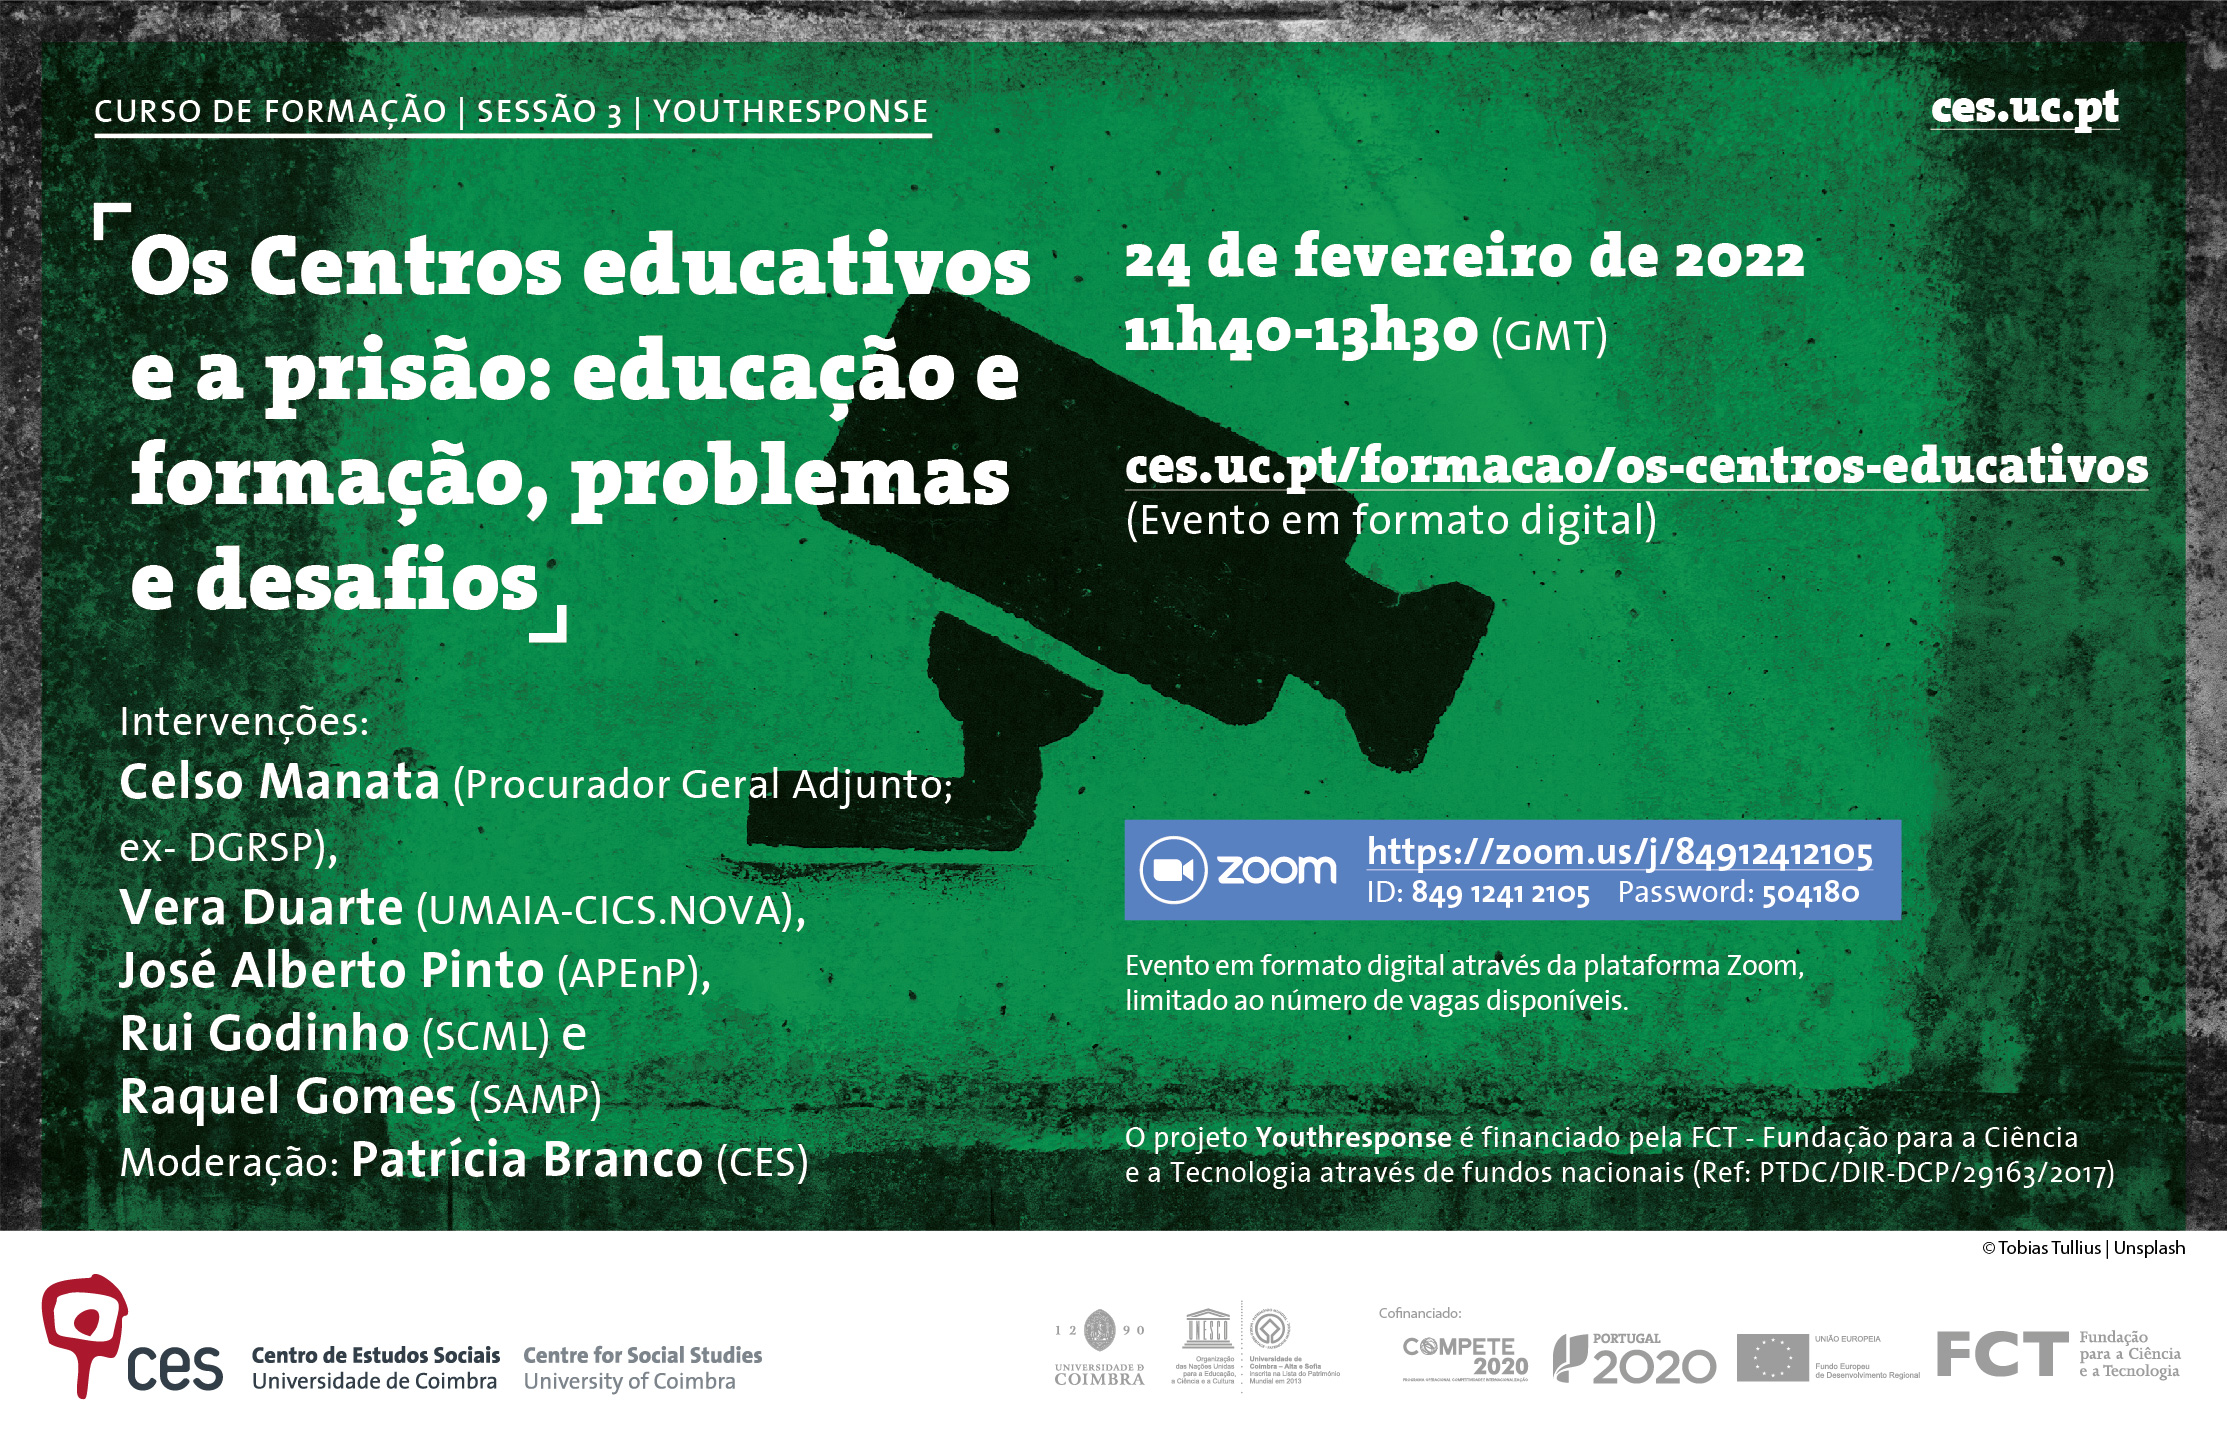 Educational centres and prison: education and training, problems and challenges <span id="edit_36851"><script>$(function() { $('#edit_36851').load( "/myces/user/editobj.php?tipo=evento&id=36851" ); });</script></span>